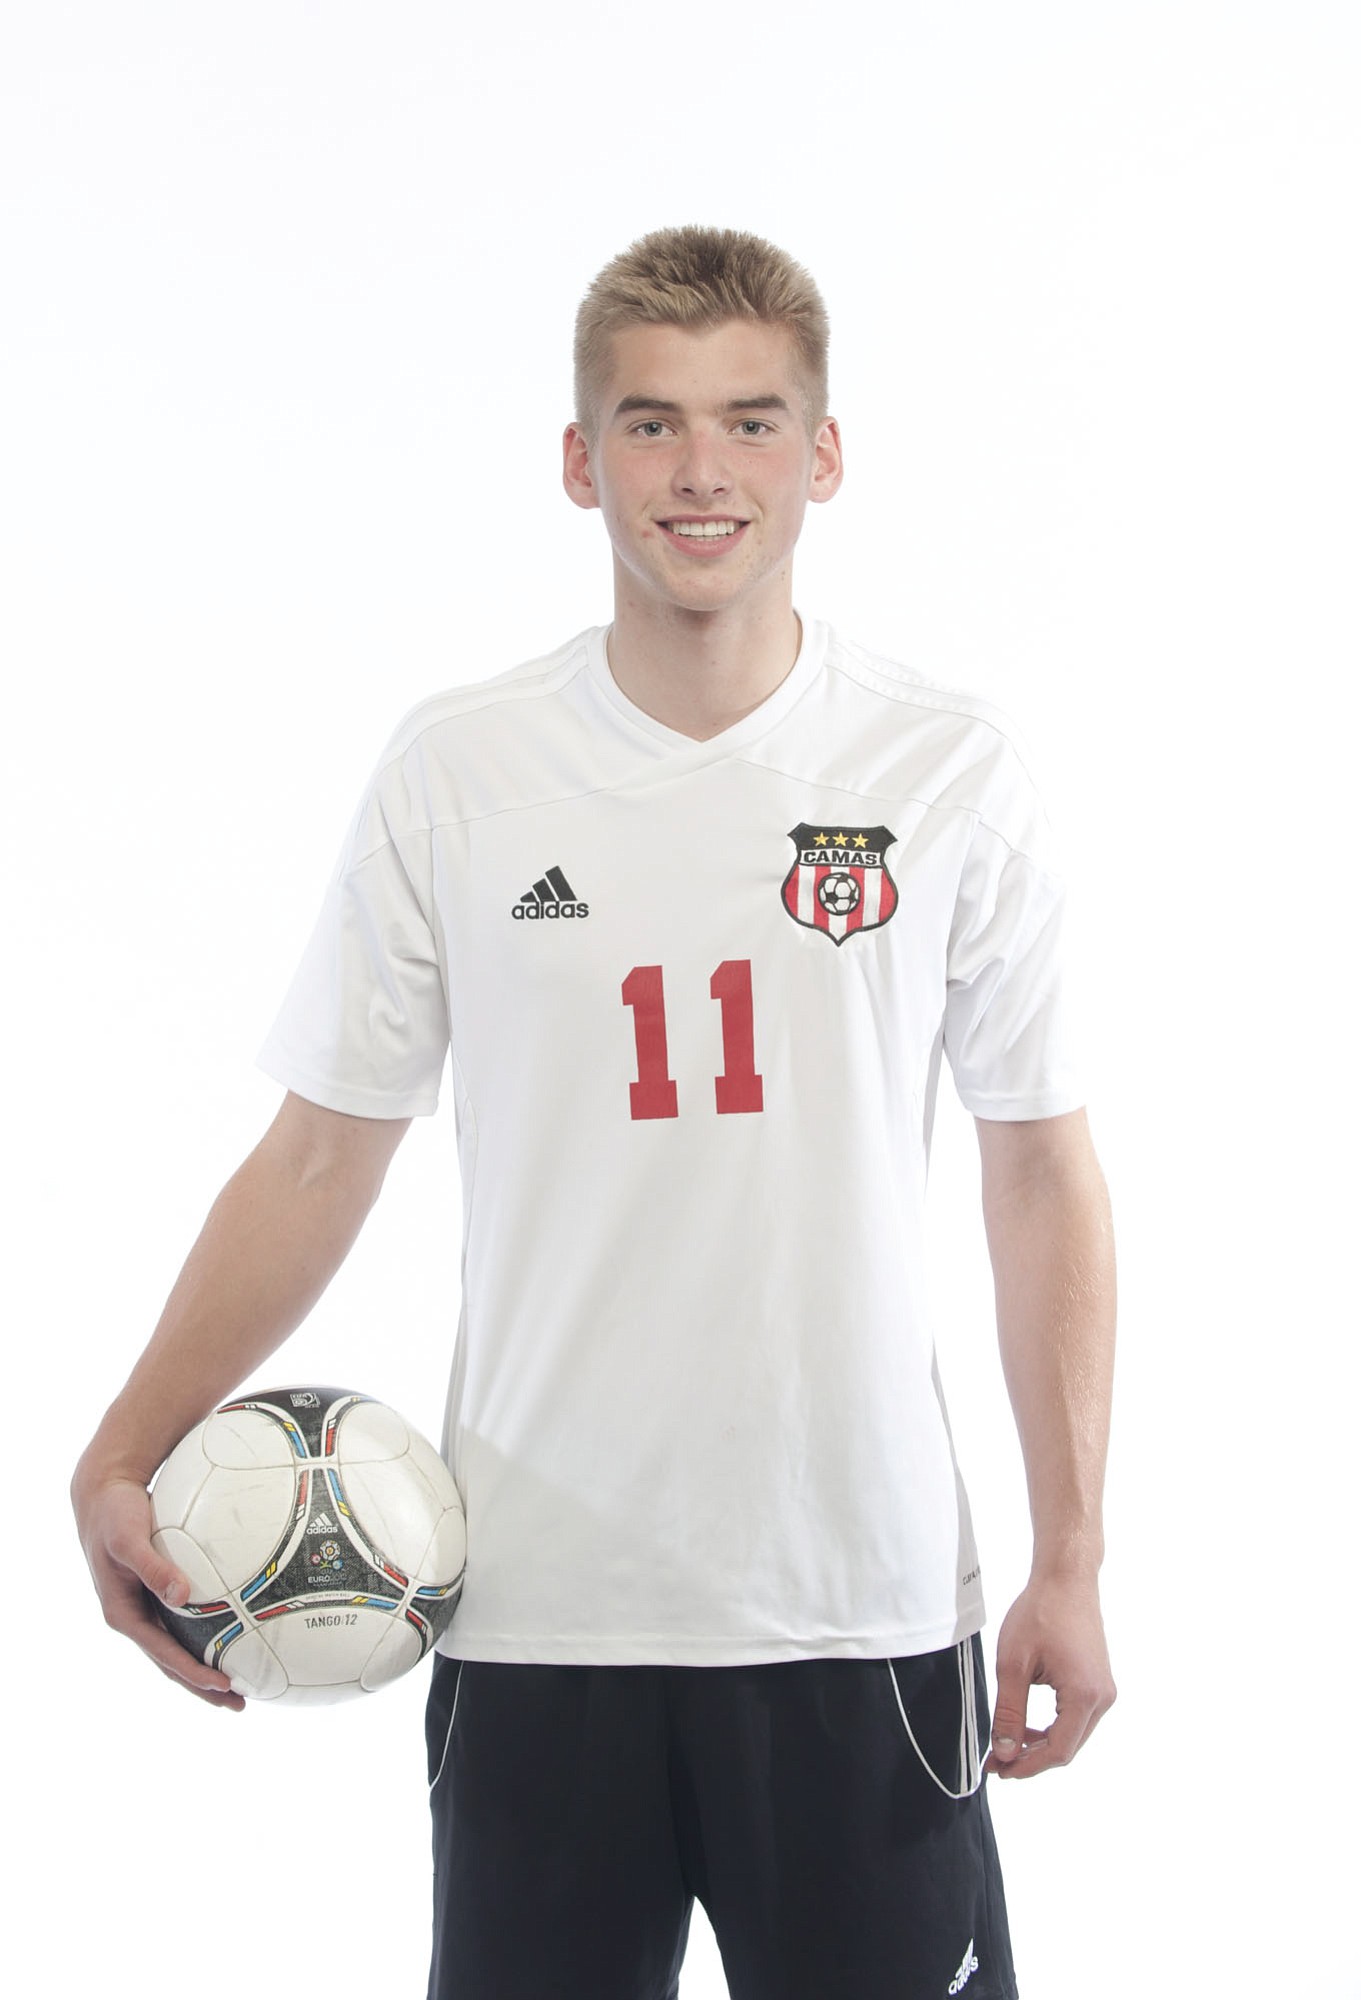 Bennett Lehner of Camas, the all-region boys soccer player of the year poses for a photo  in Vancouver Thursday June 4, 2015.